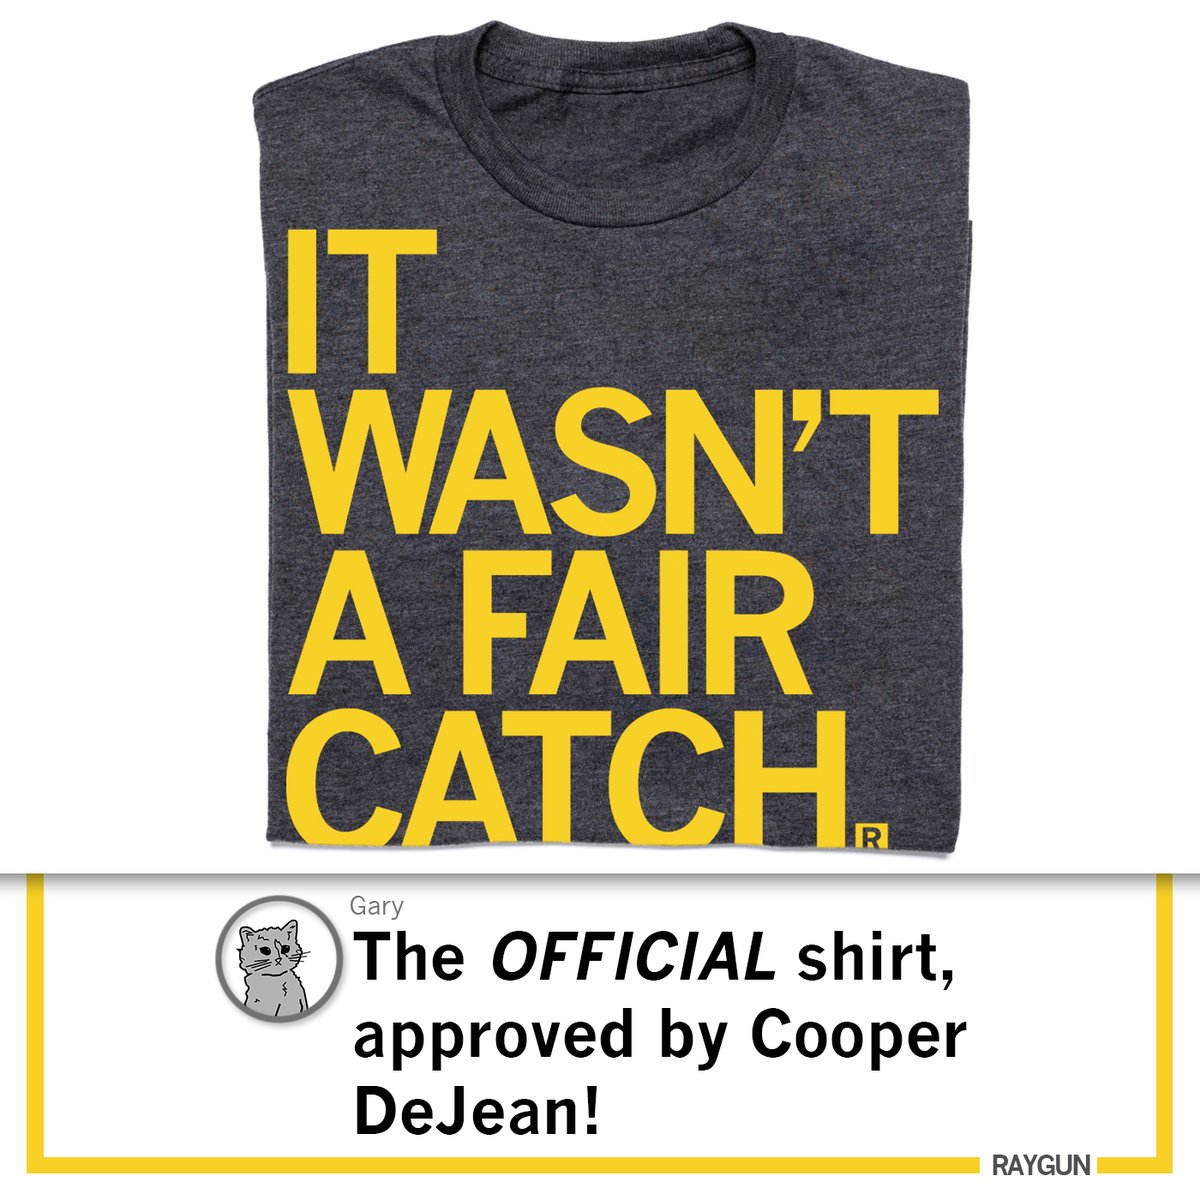 It took a minute, but here is the OFFICIAL 'It Wasn't A Fair Catch' shirt, approved by Cooper DeJean himself. 

Win or lose, it's important to remember that #ItWasntAFairCatch. 

New #raygun shirt online now and in stores soon: raygunsite.com/collections/me…